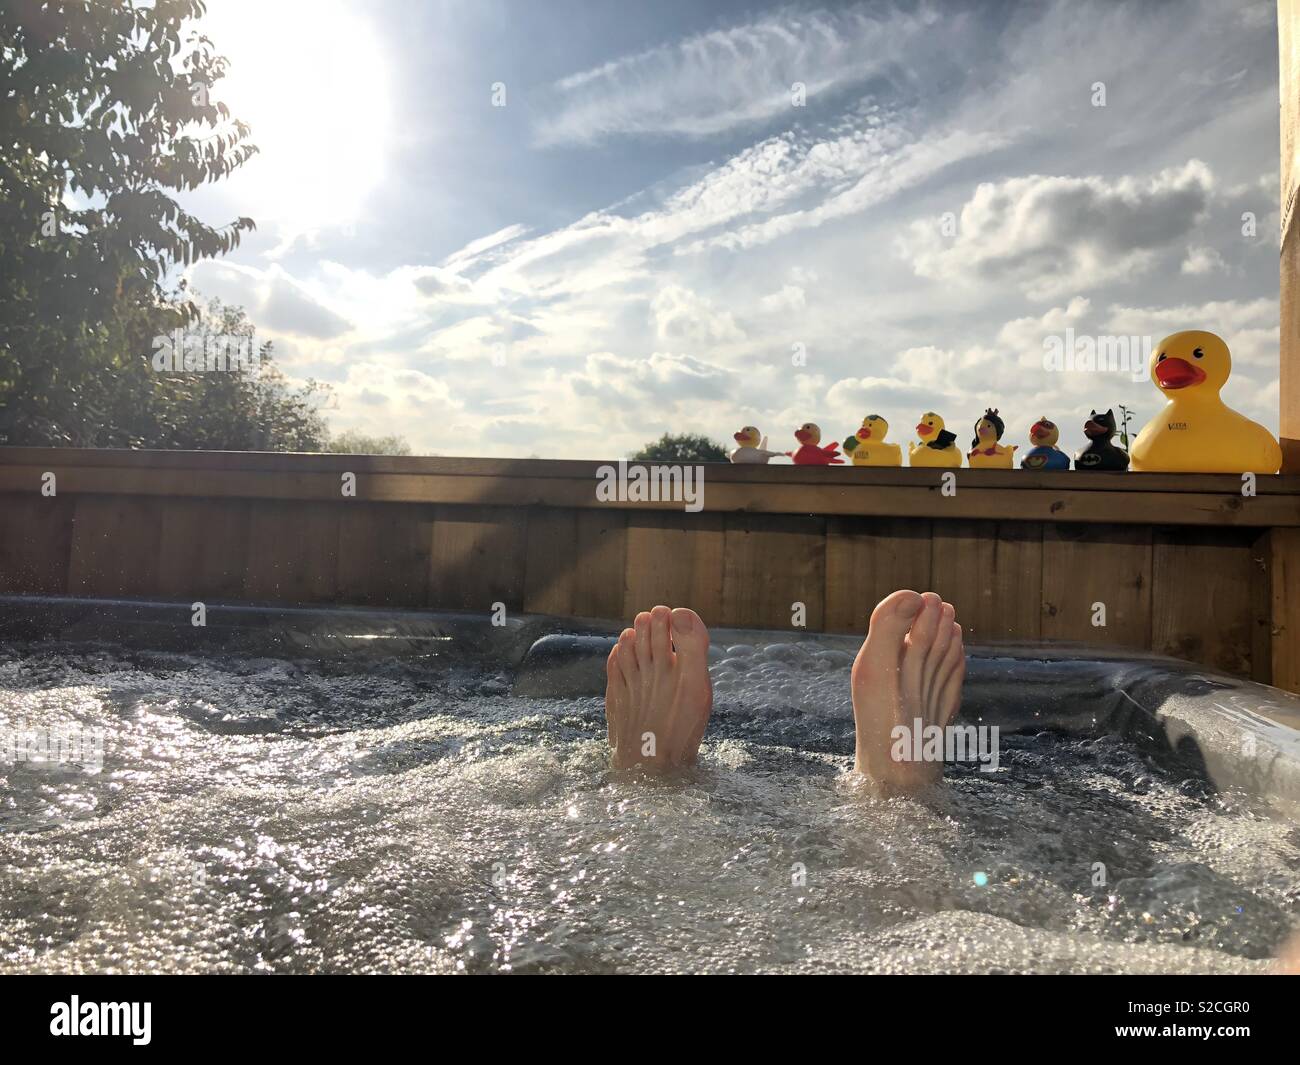 Feet and toes sticking out the hot tub on a sunny day with rubber ducks watching Stock Photo